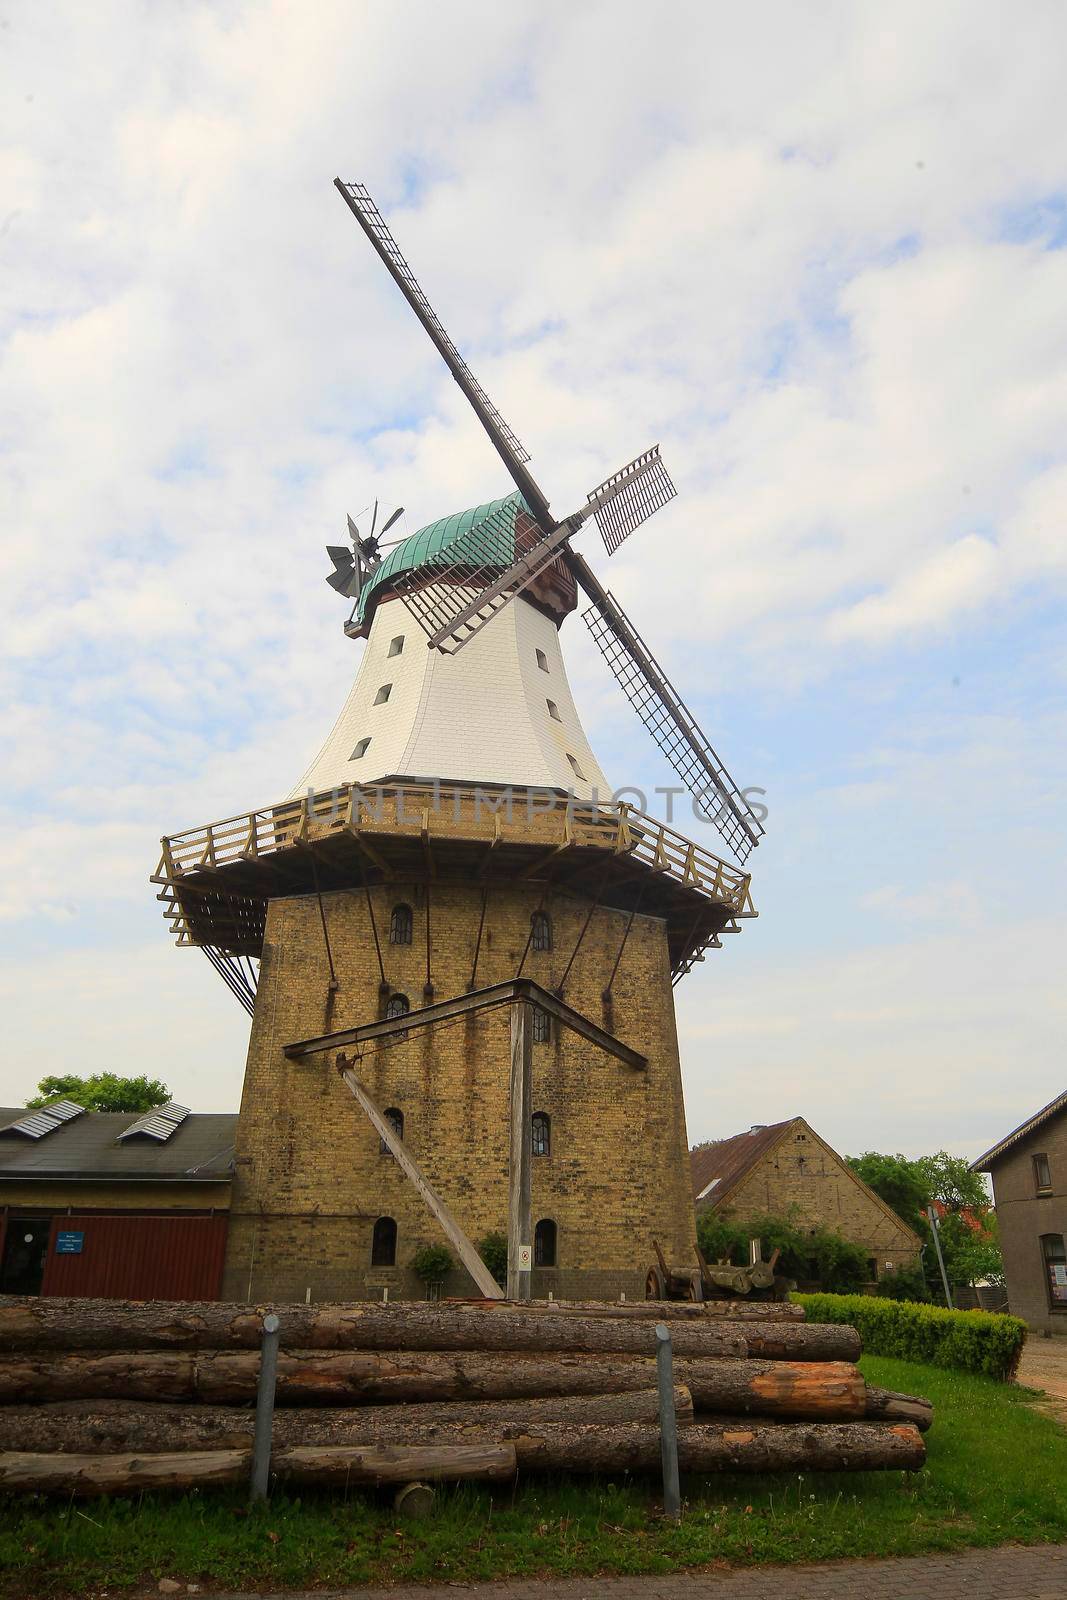 The historical Windmill in Kappeln, Schleswig-Holstein, Germany, Europe by Weltblick